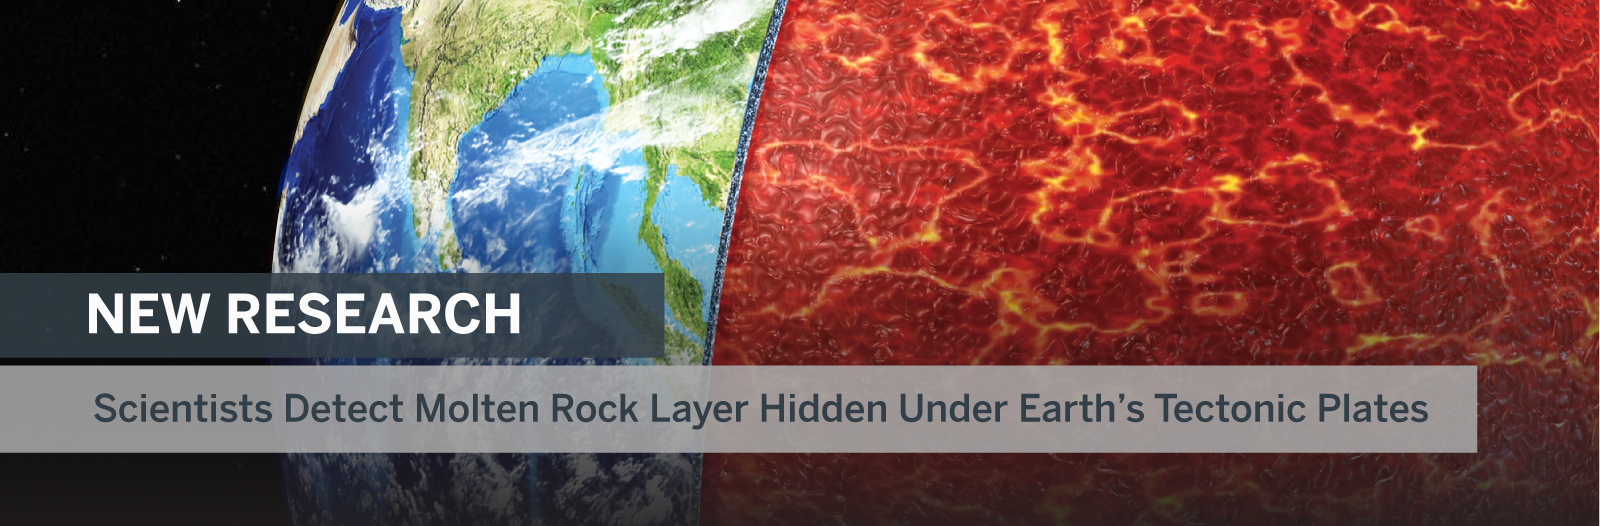 Scientists Detect Molten Rock Layer Hidden Under Earth’s Tectonic Plates – cover